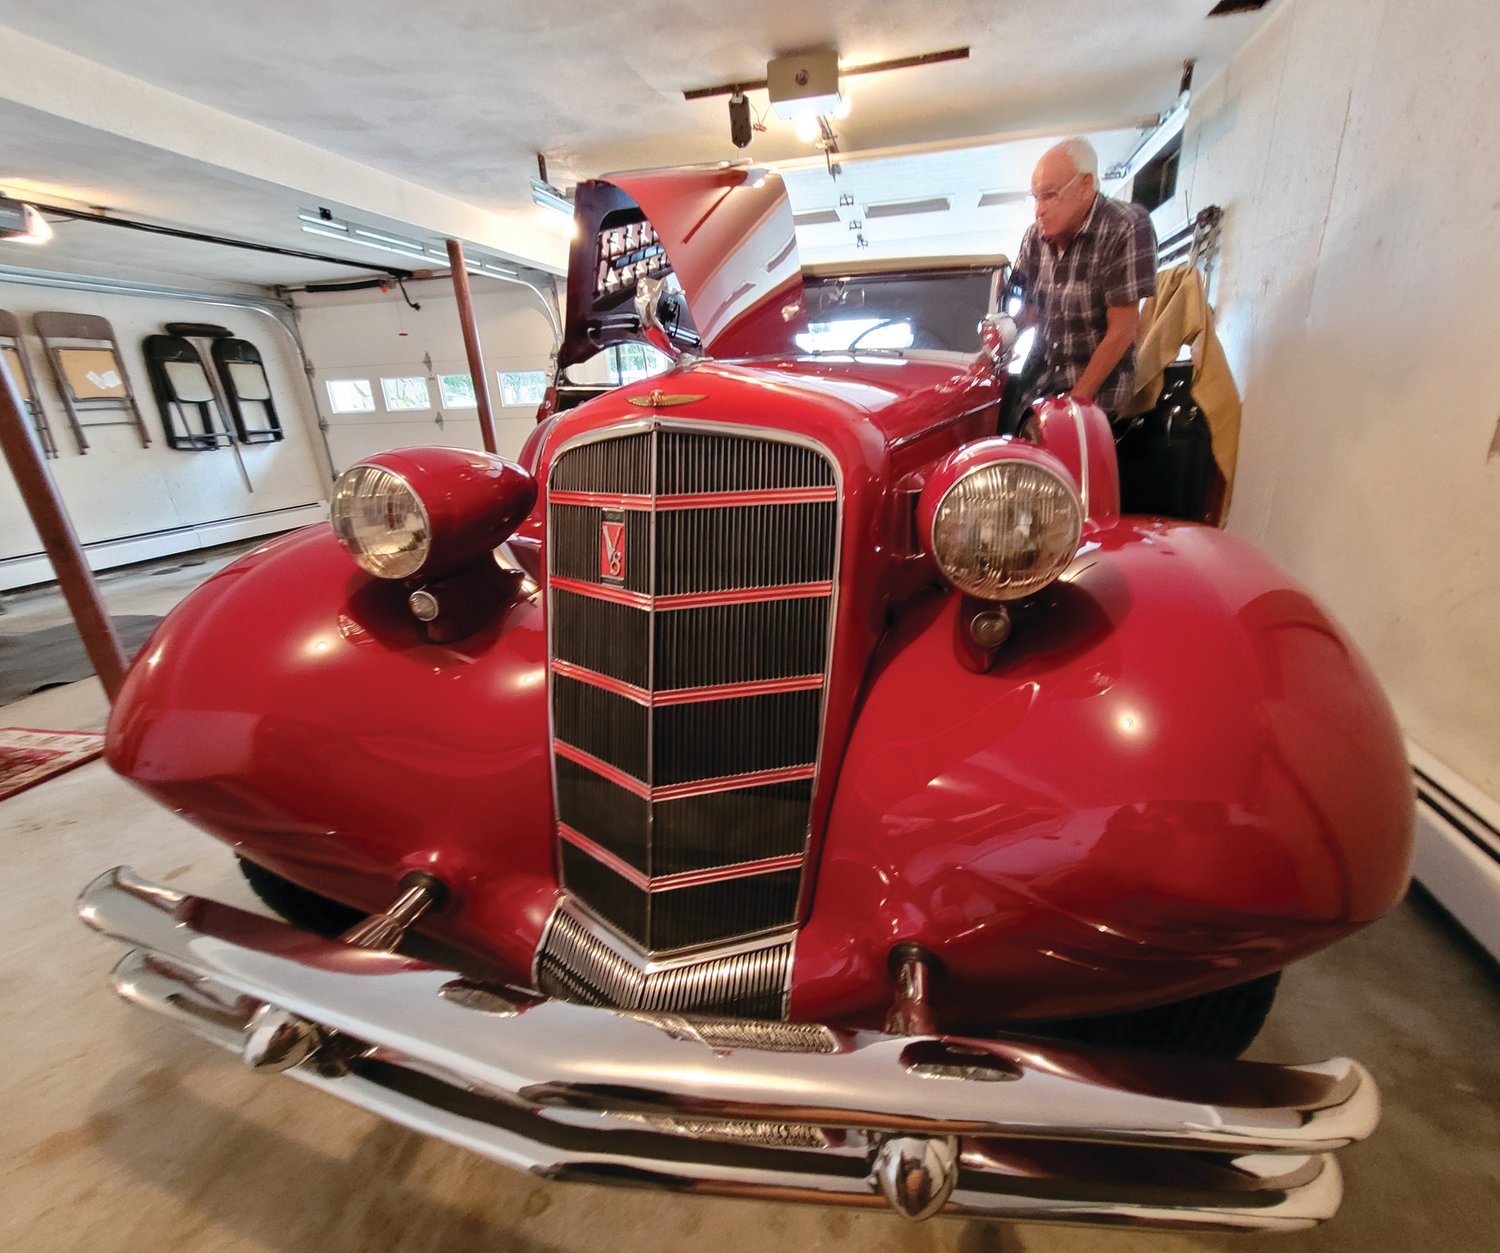 READY TO ROLL: John Ricci opened the suicide doors and climbed into his 1934 Cadillac.